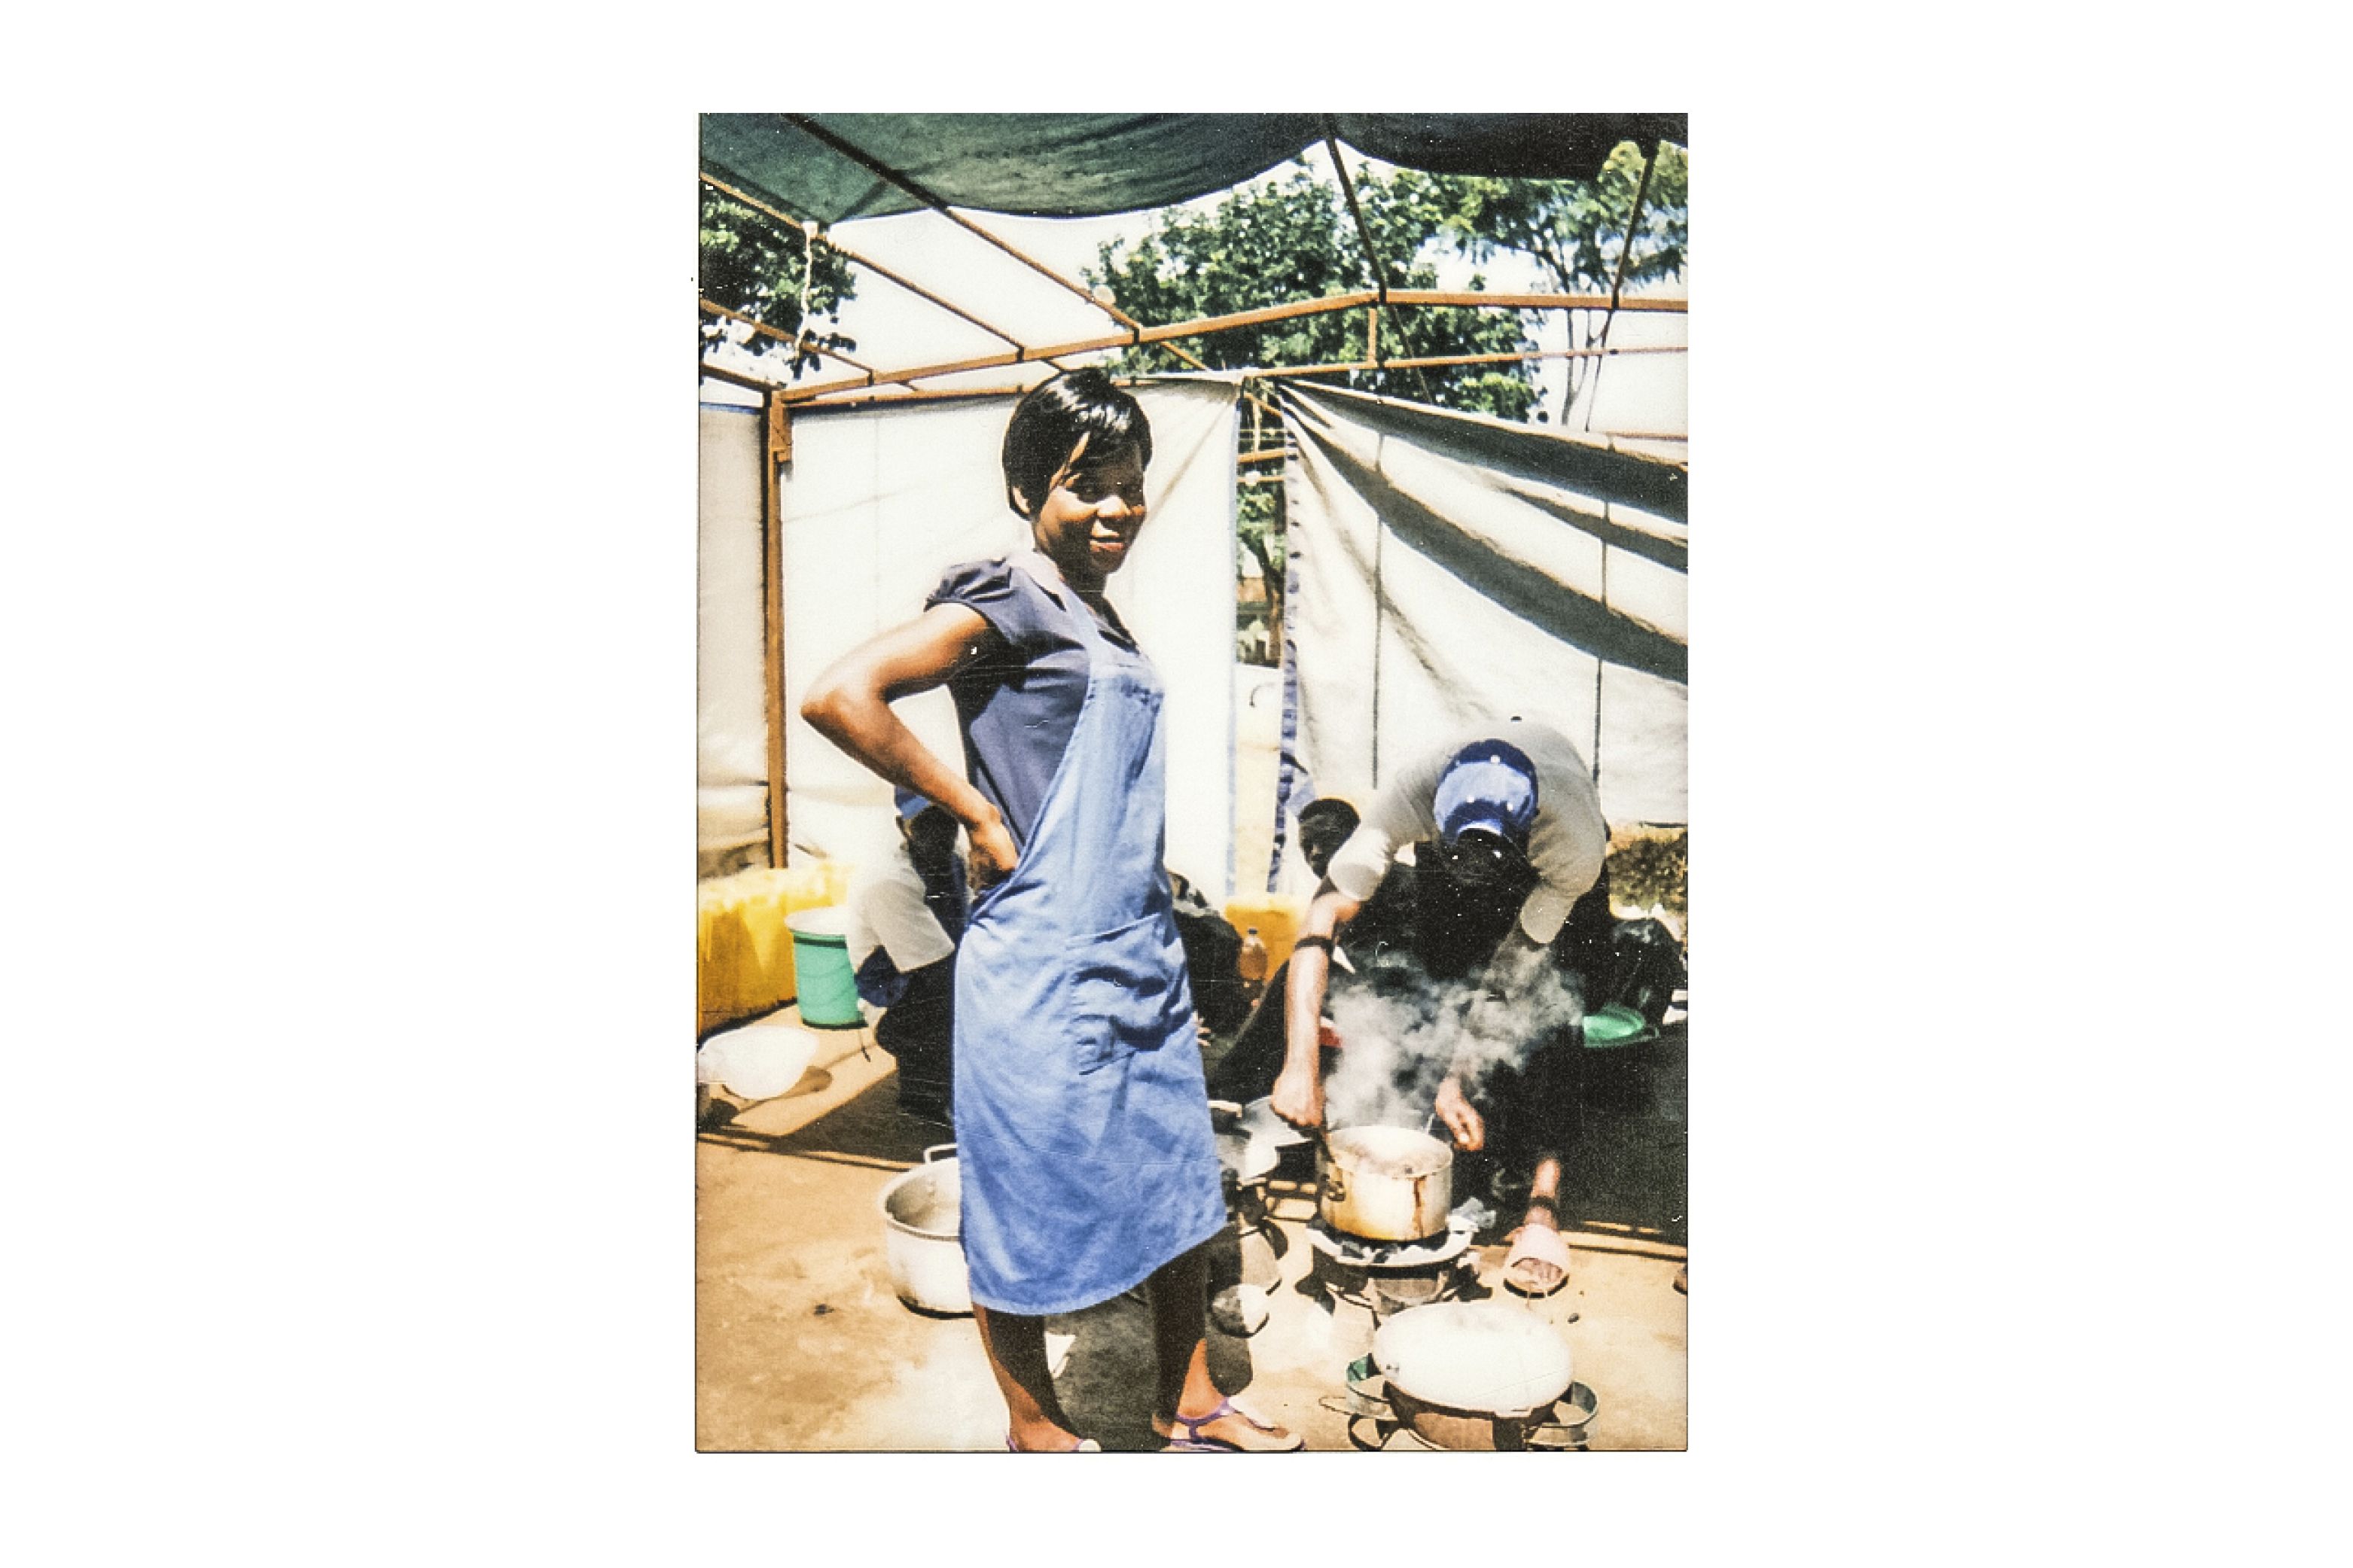 Annie Kanwara is a waitress at a roadside restaurant close to the Ministry of Information. She cooks on charcoal and says, "My customers don't like smoke." Image by Nathalie Bertrams. Malawi, 2017.